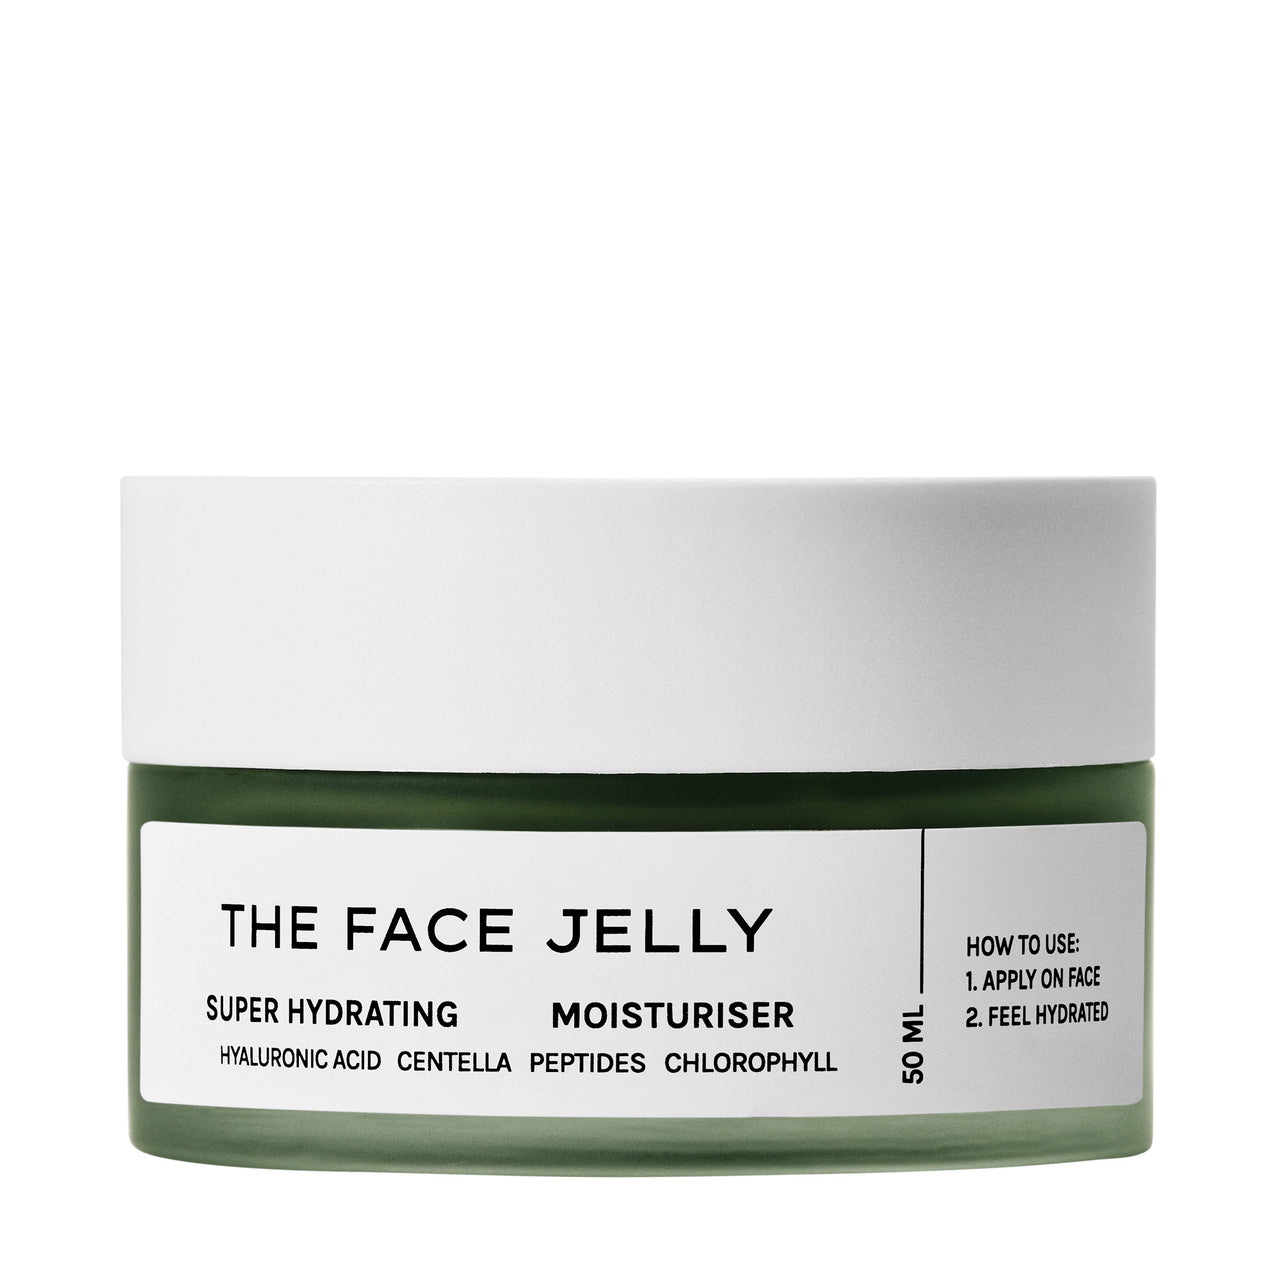 THE FACE JELLY